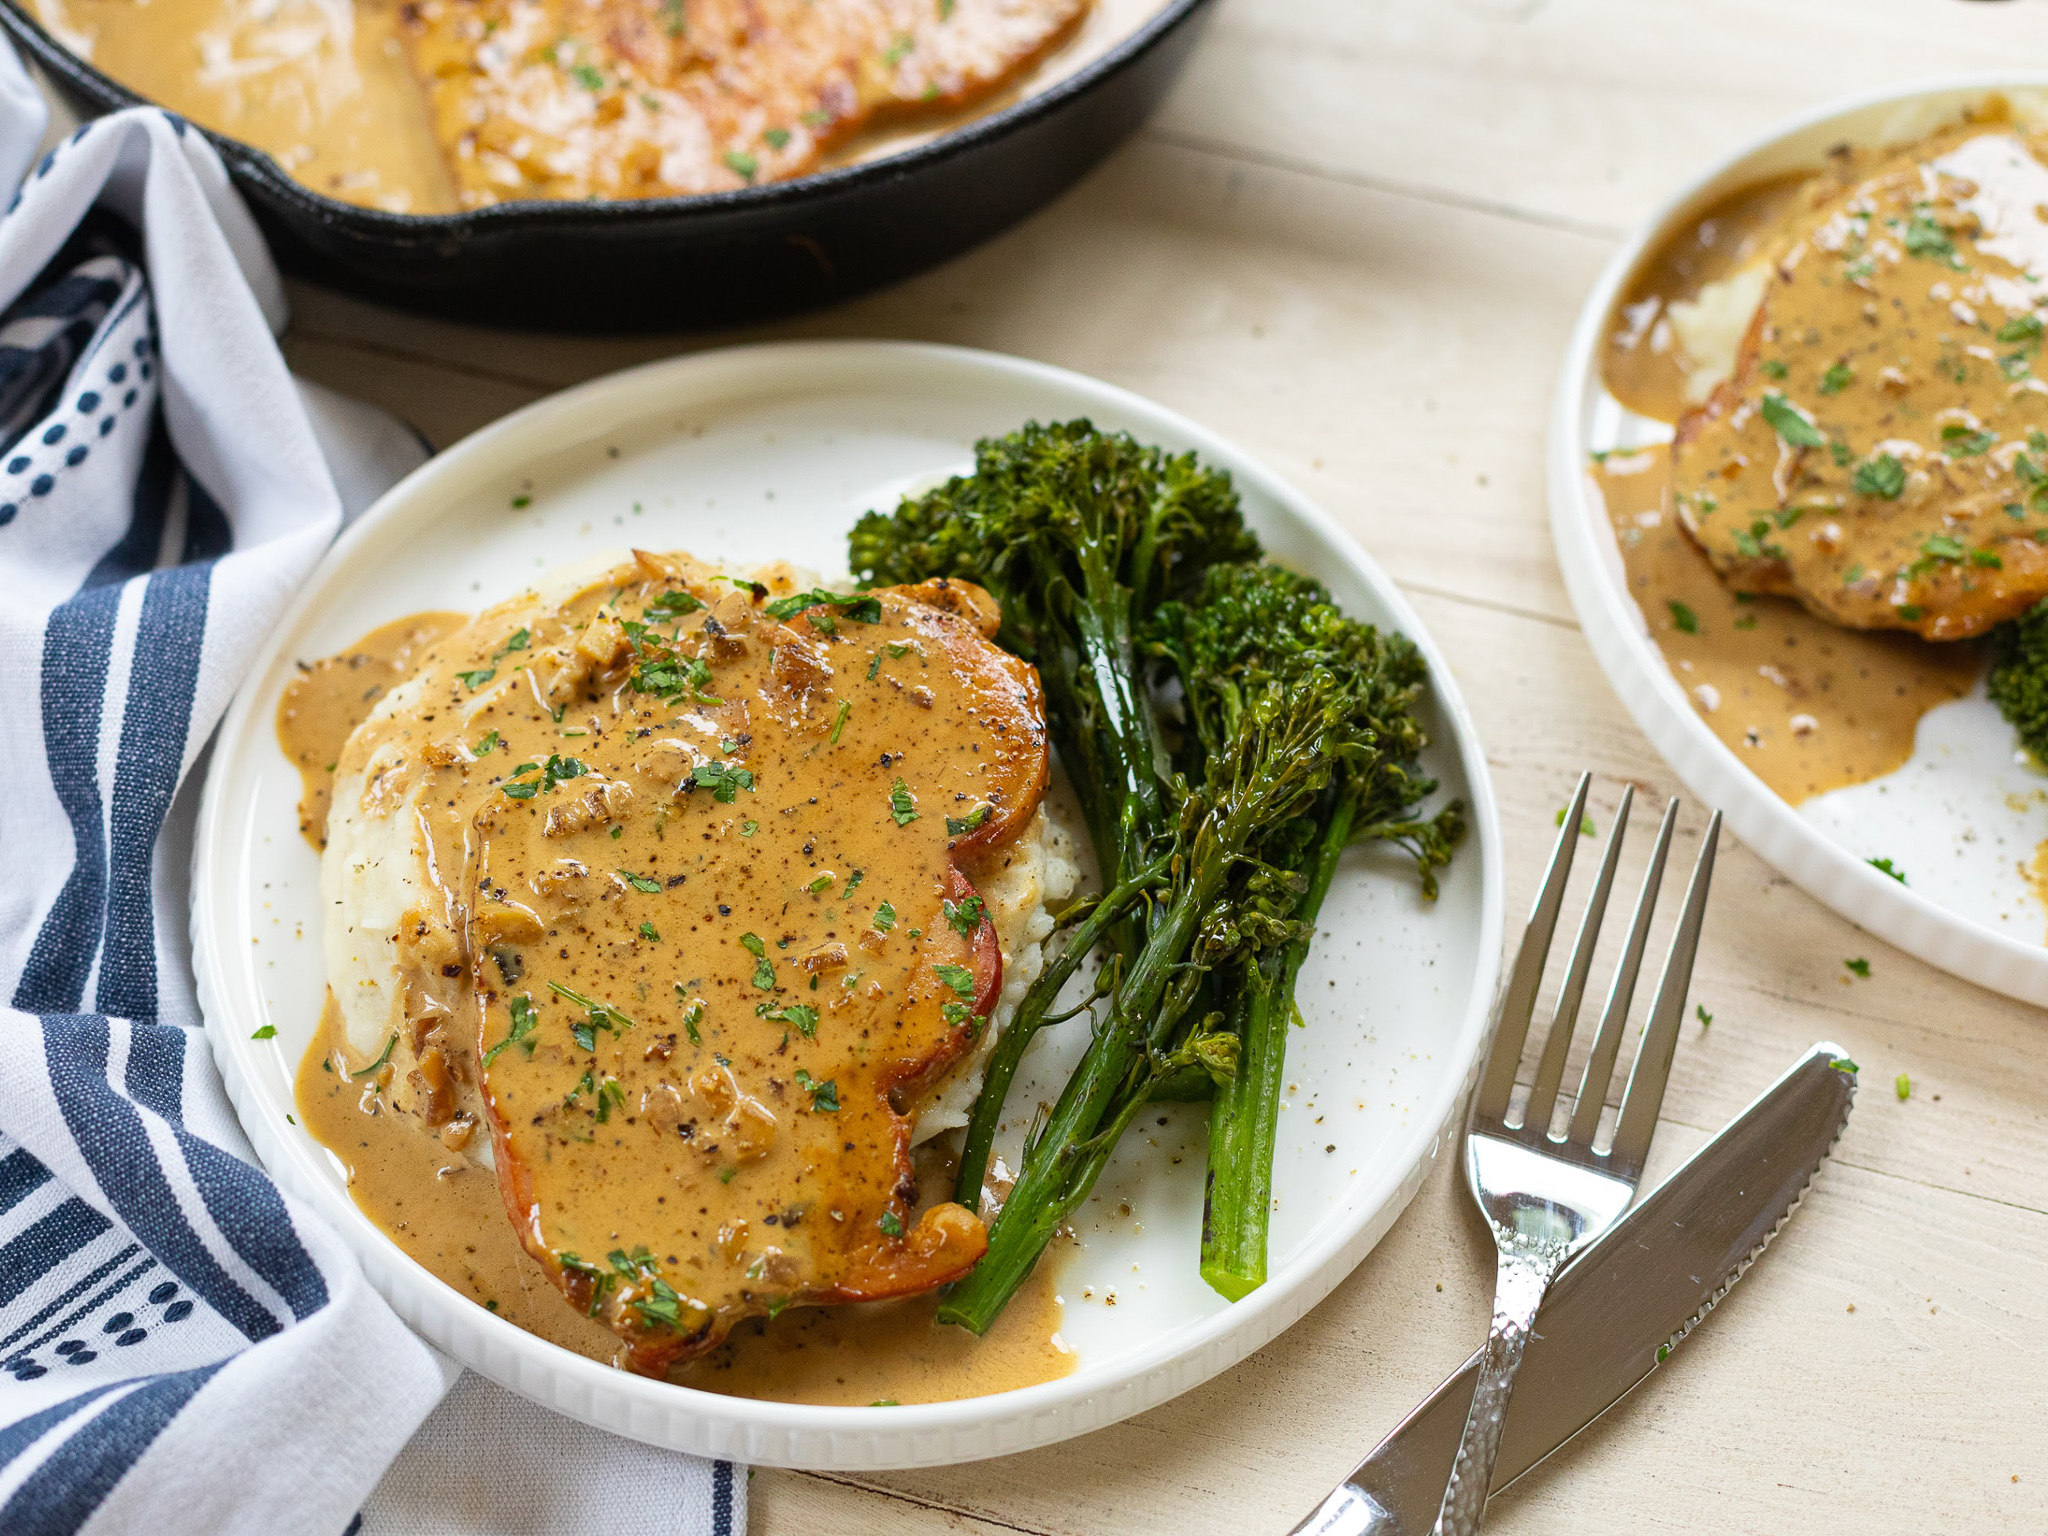 Quick & Easy Dinners Start With Smithfield Anytime Favorites Products – Try My 10-Minute Skillet Dijon Pork Chops